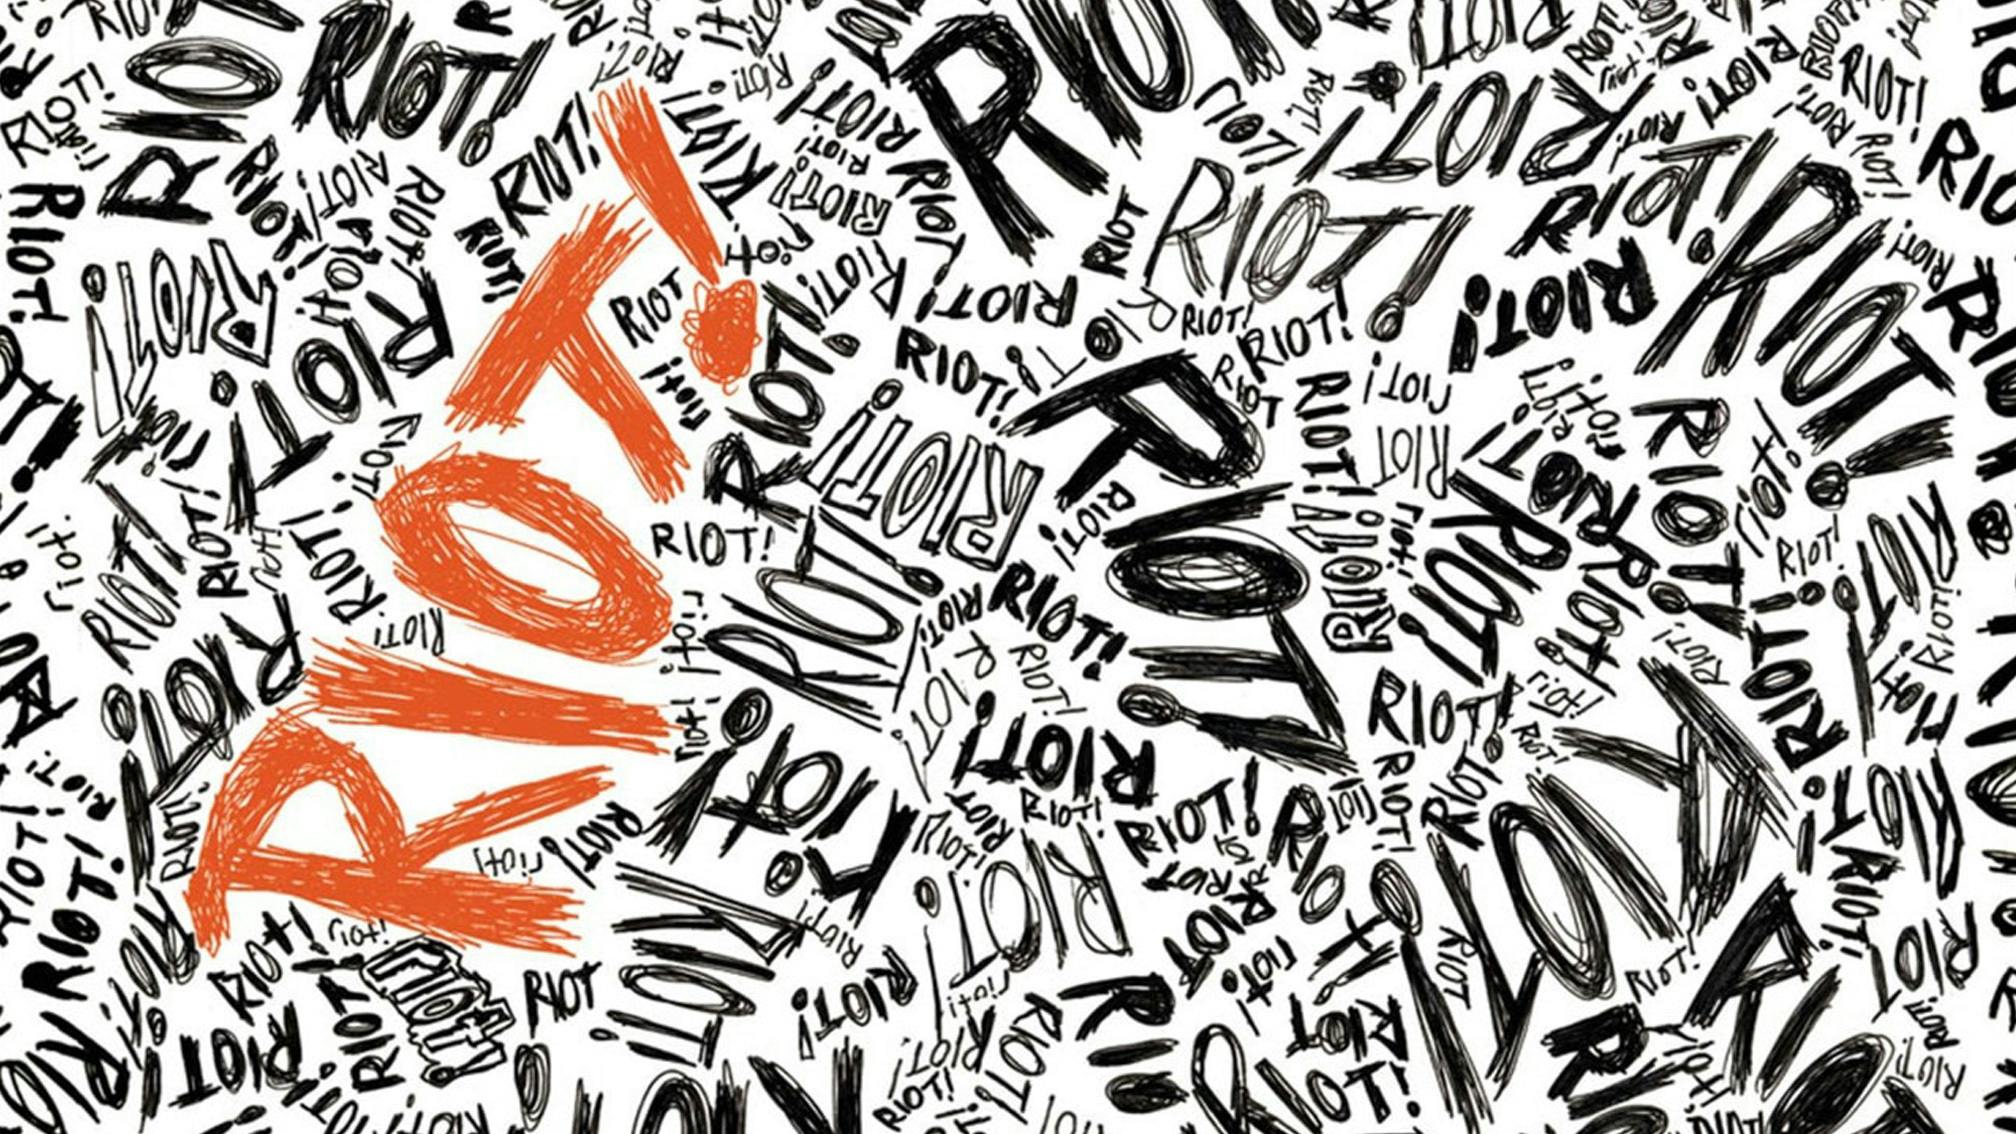 Paramore to reissue Riot! on silver vinyl for Fueled By Ramen's 25th anniversary